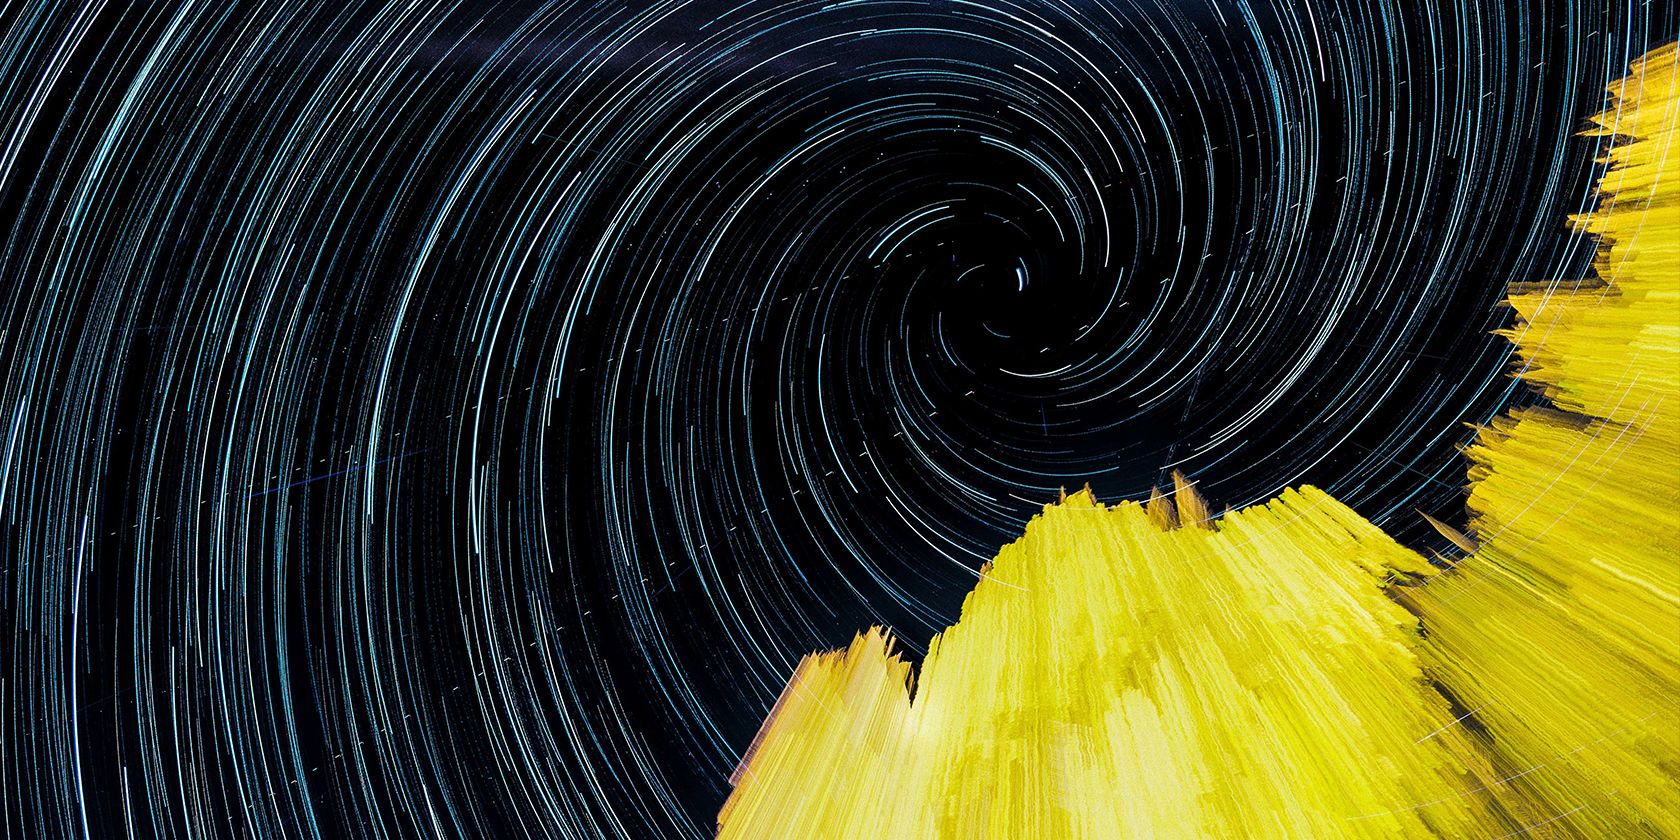 An example of star trail photography.